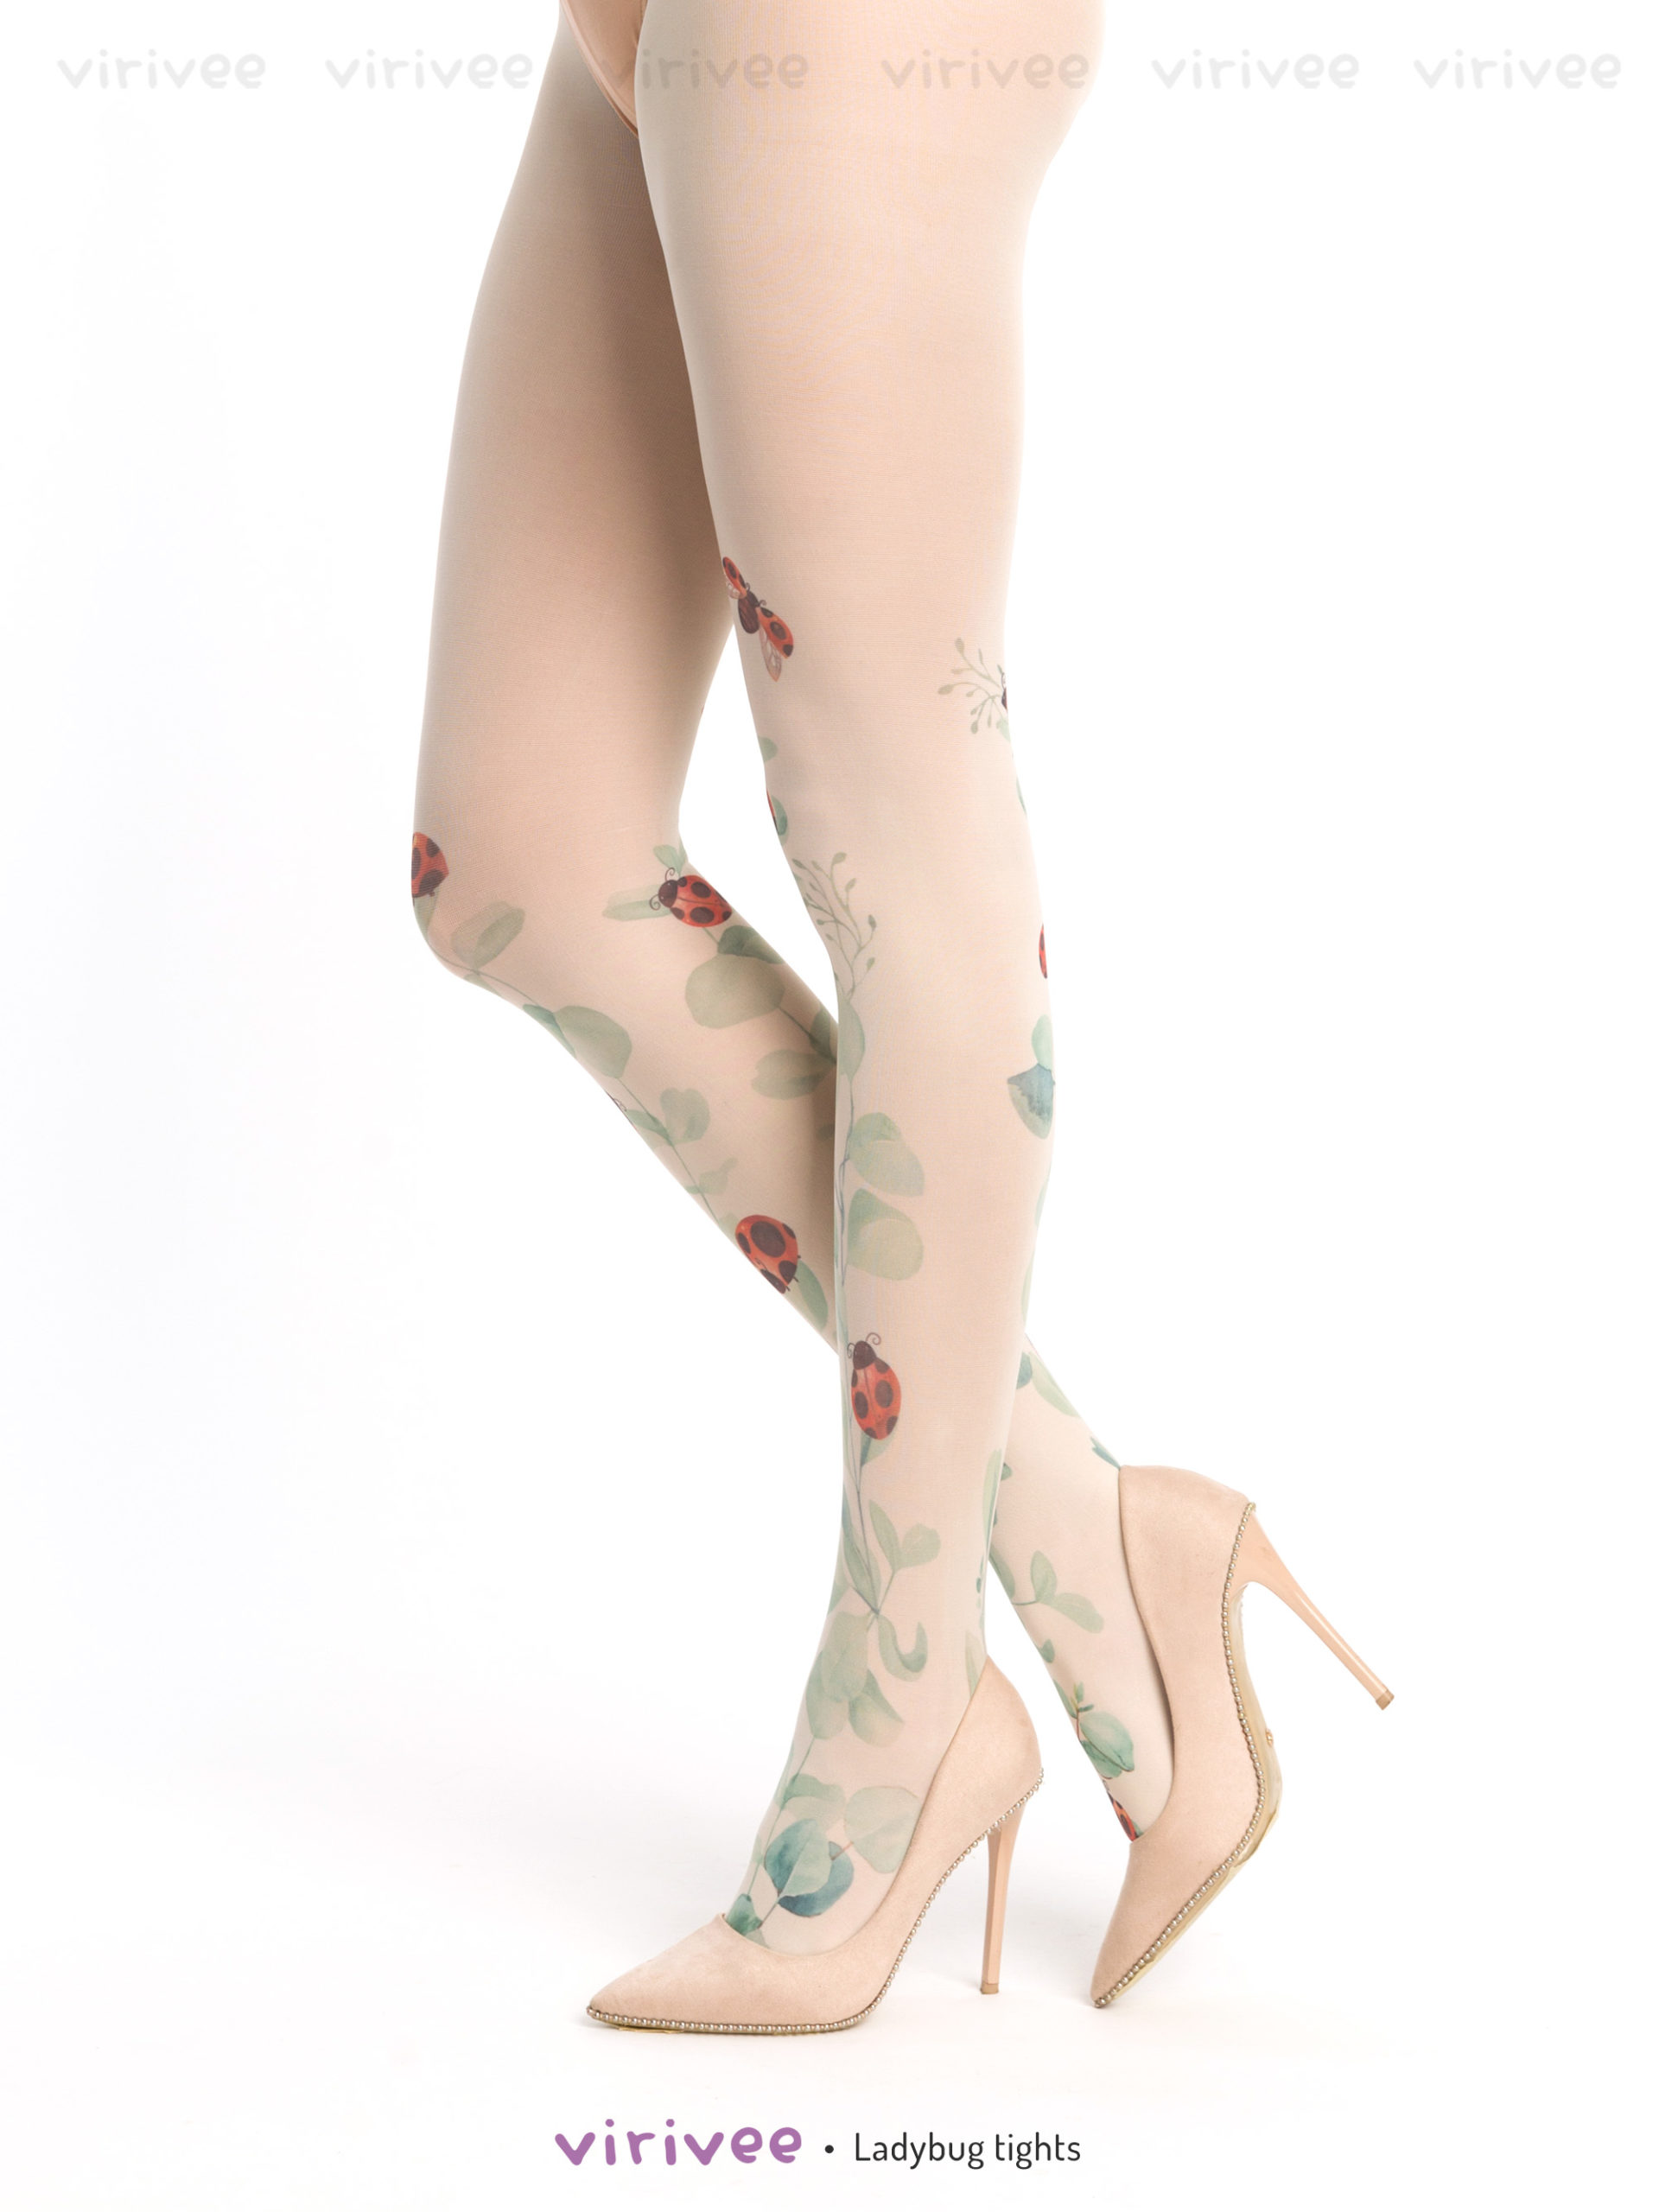 Floral tights with ladybugs - Virivee Tights - Unique tights designed and  made in Europe